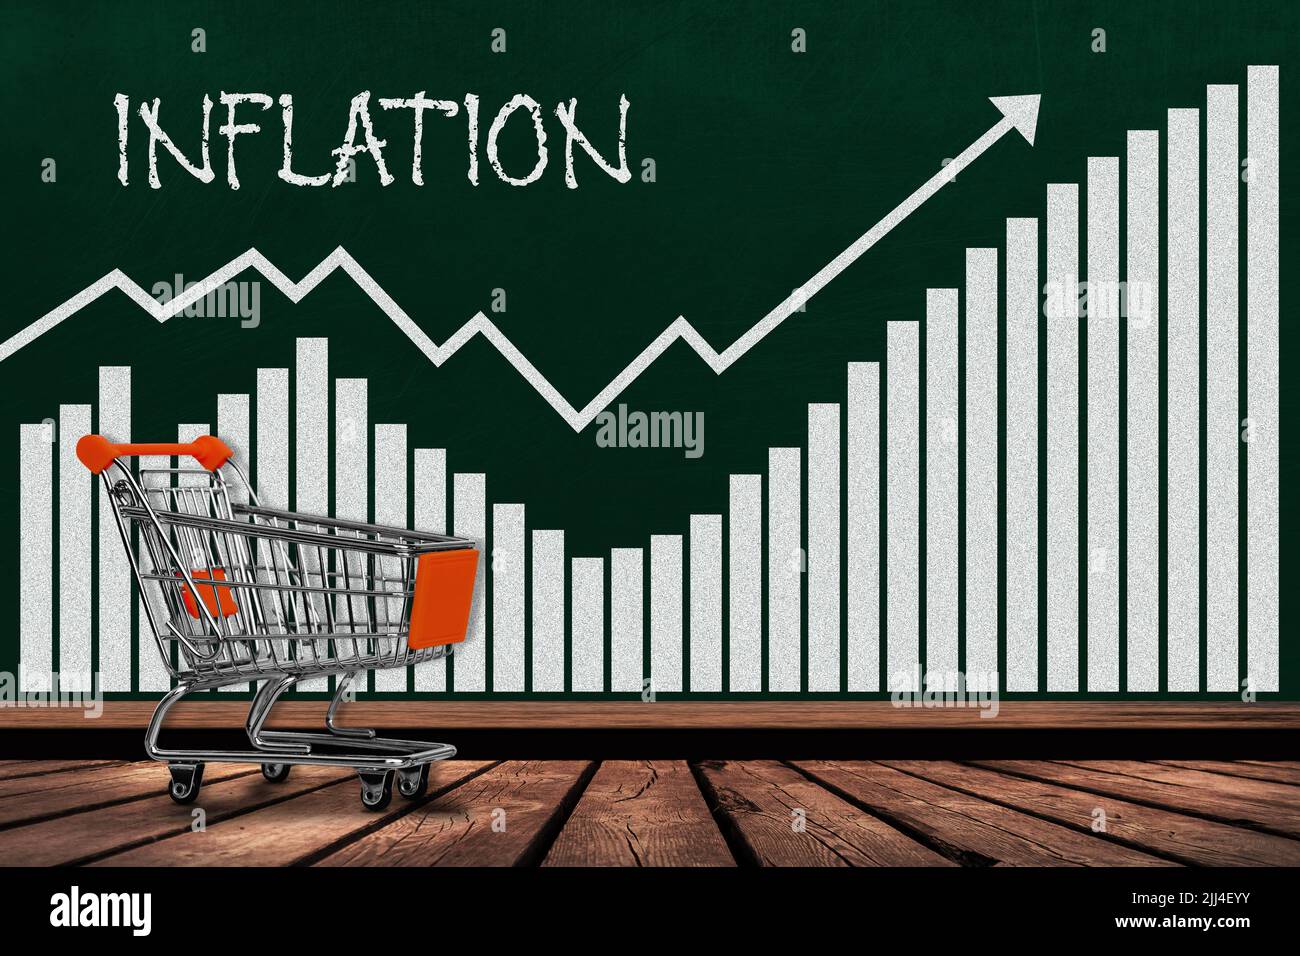 Rising inflation concept shown by increasing bar chart on chalkboard with empty shopping cart on wooden table. Stock Photo